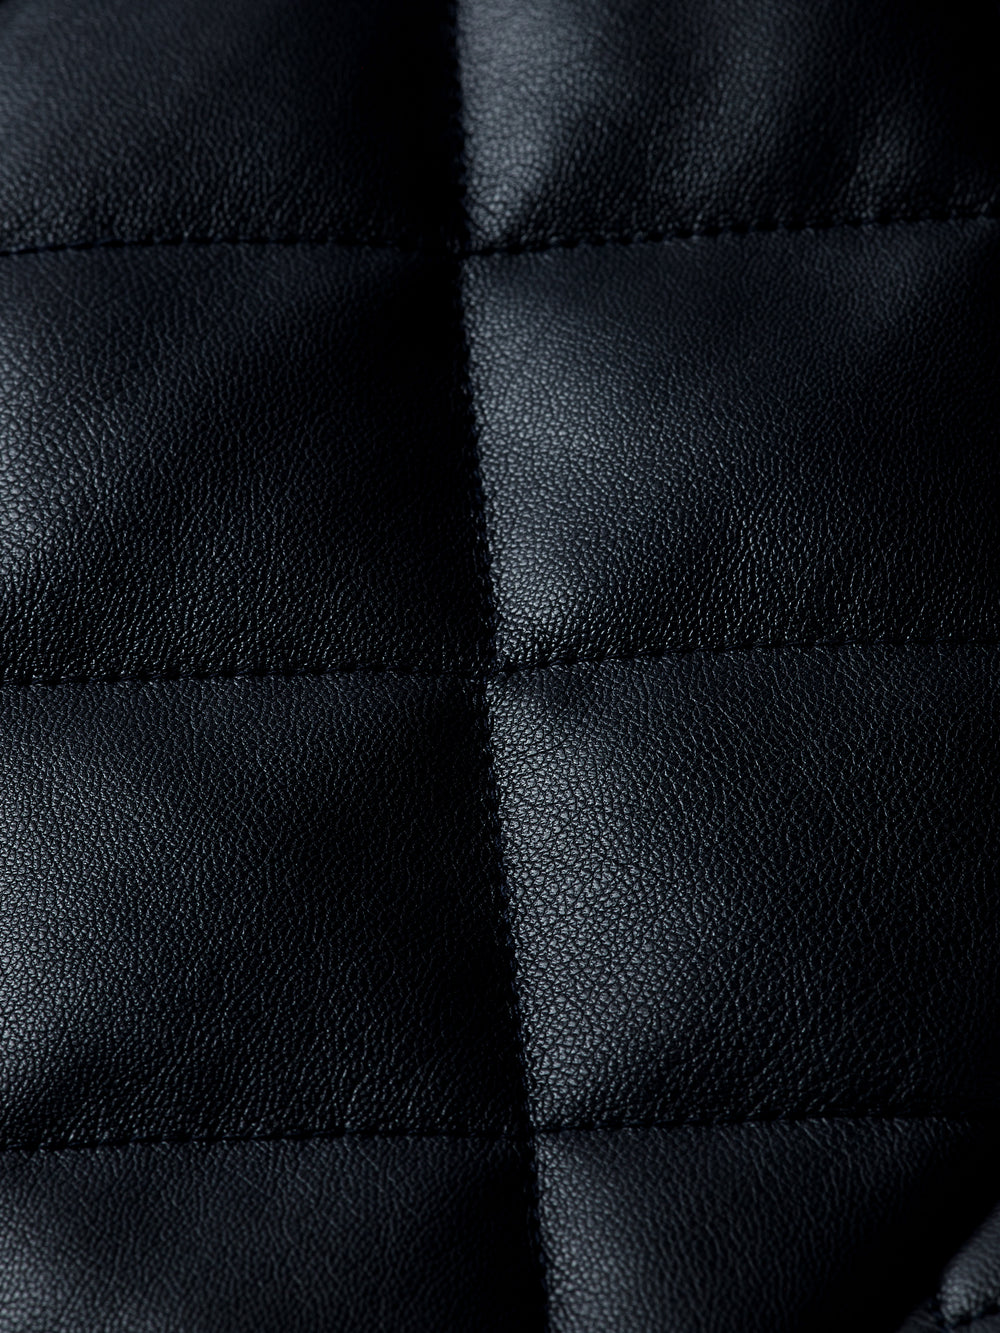 Faux leather quilted jacket - Scotch & Soda NZ